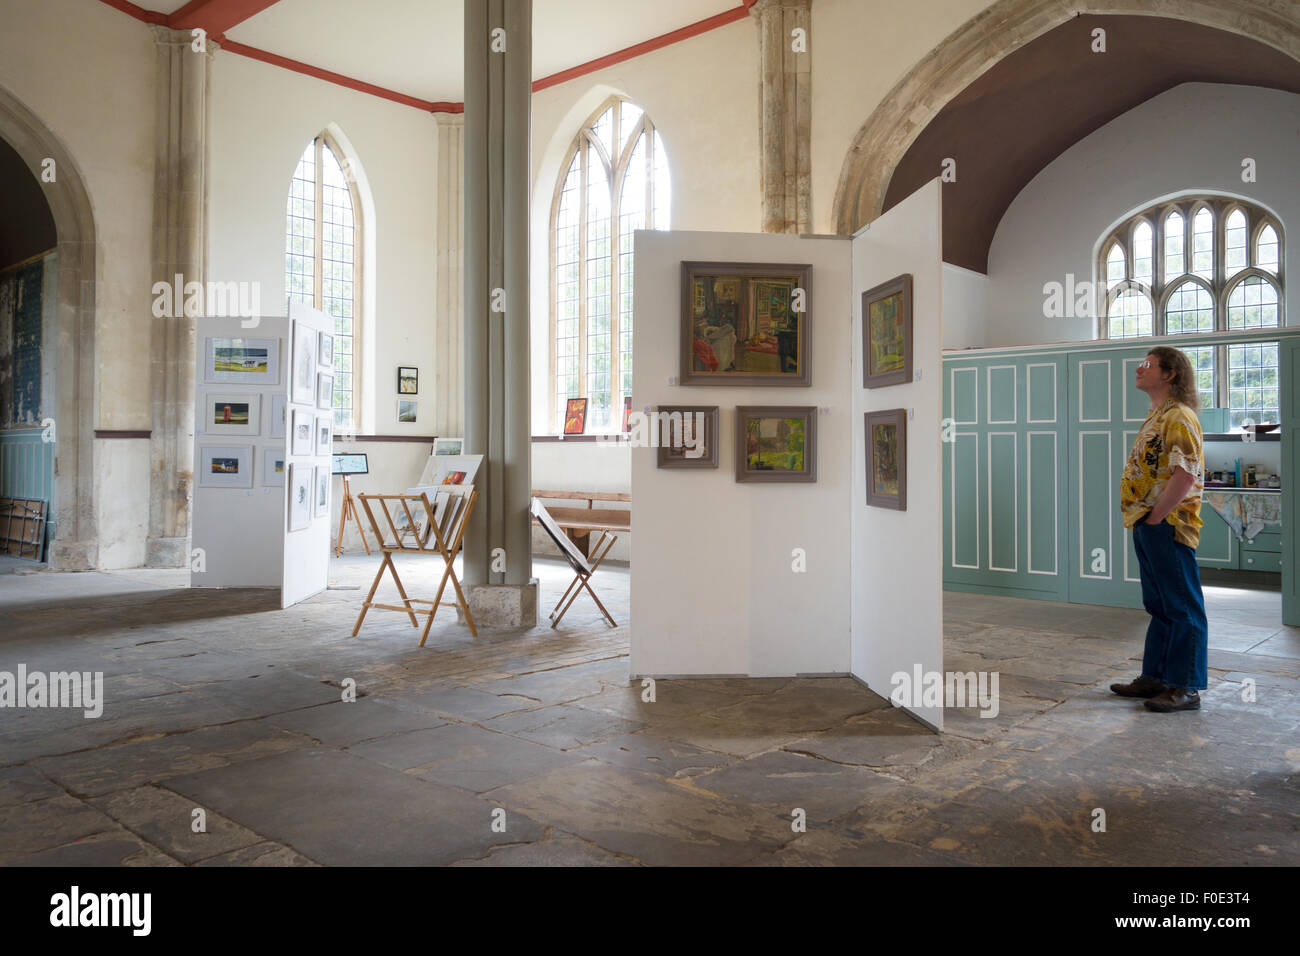 A man looking at paintings in a local village art exhibition in a country church, Swaffham Prior village , Cambridgeshire UK Stock Photo